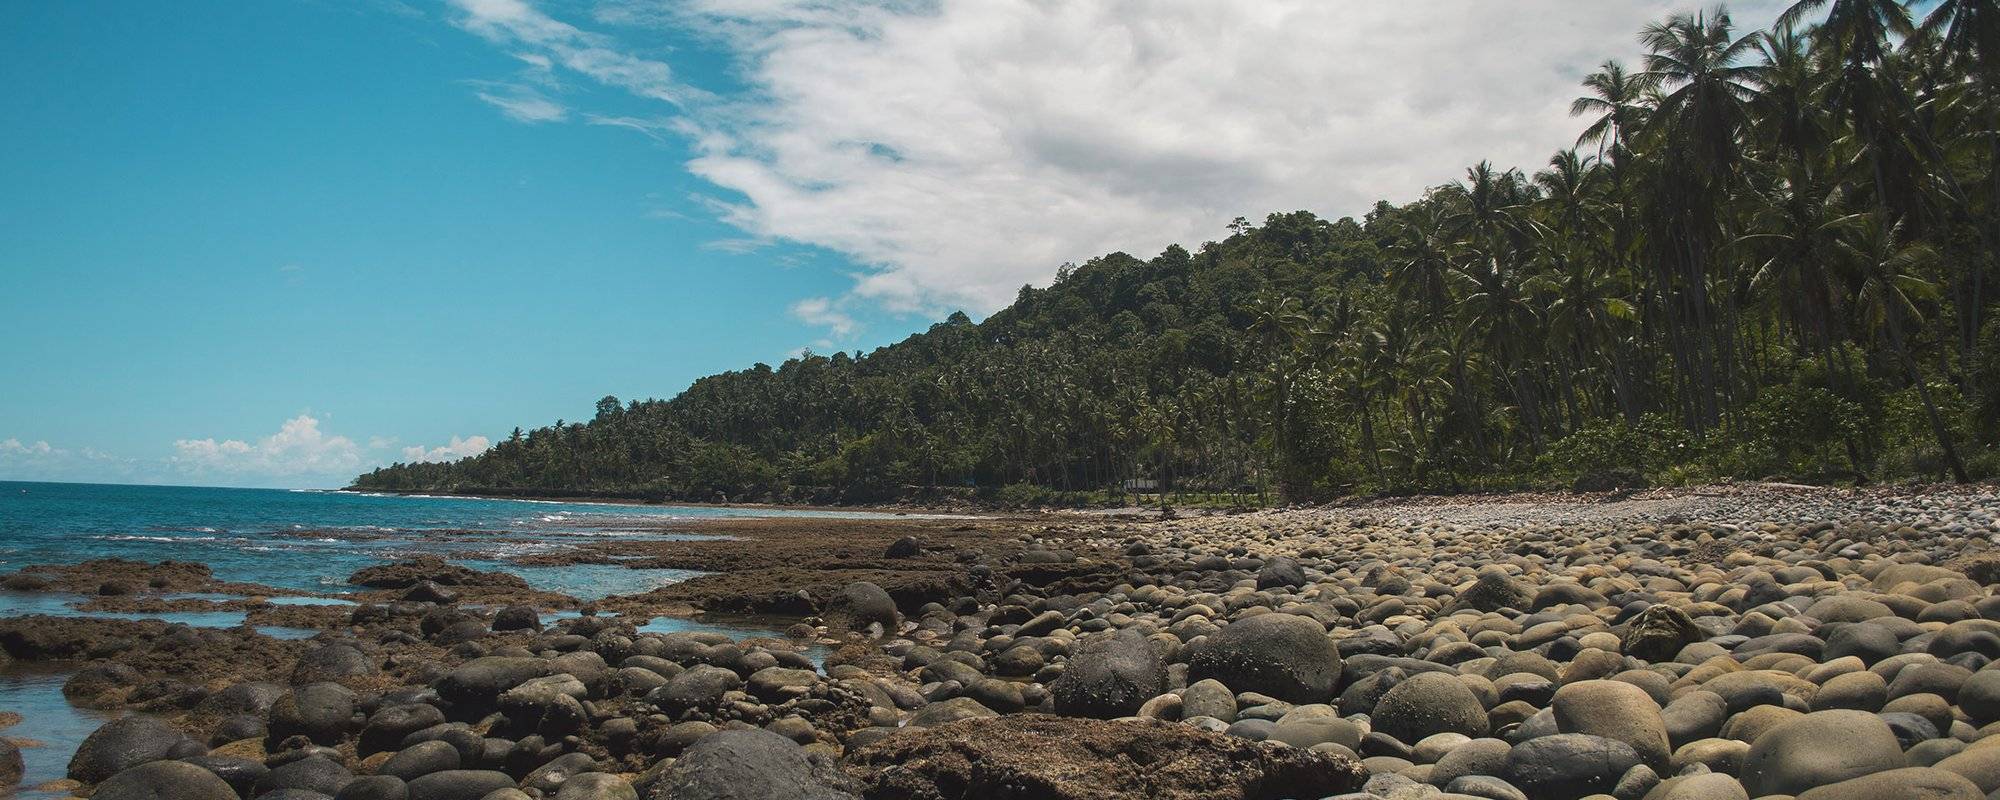 Rocks and Waves: A Trip To Manay, Davao Oriental, Philippines